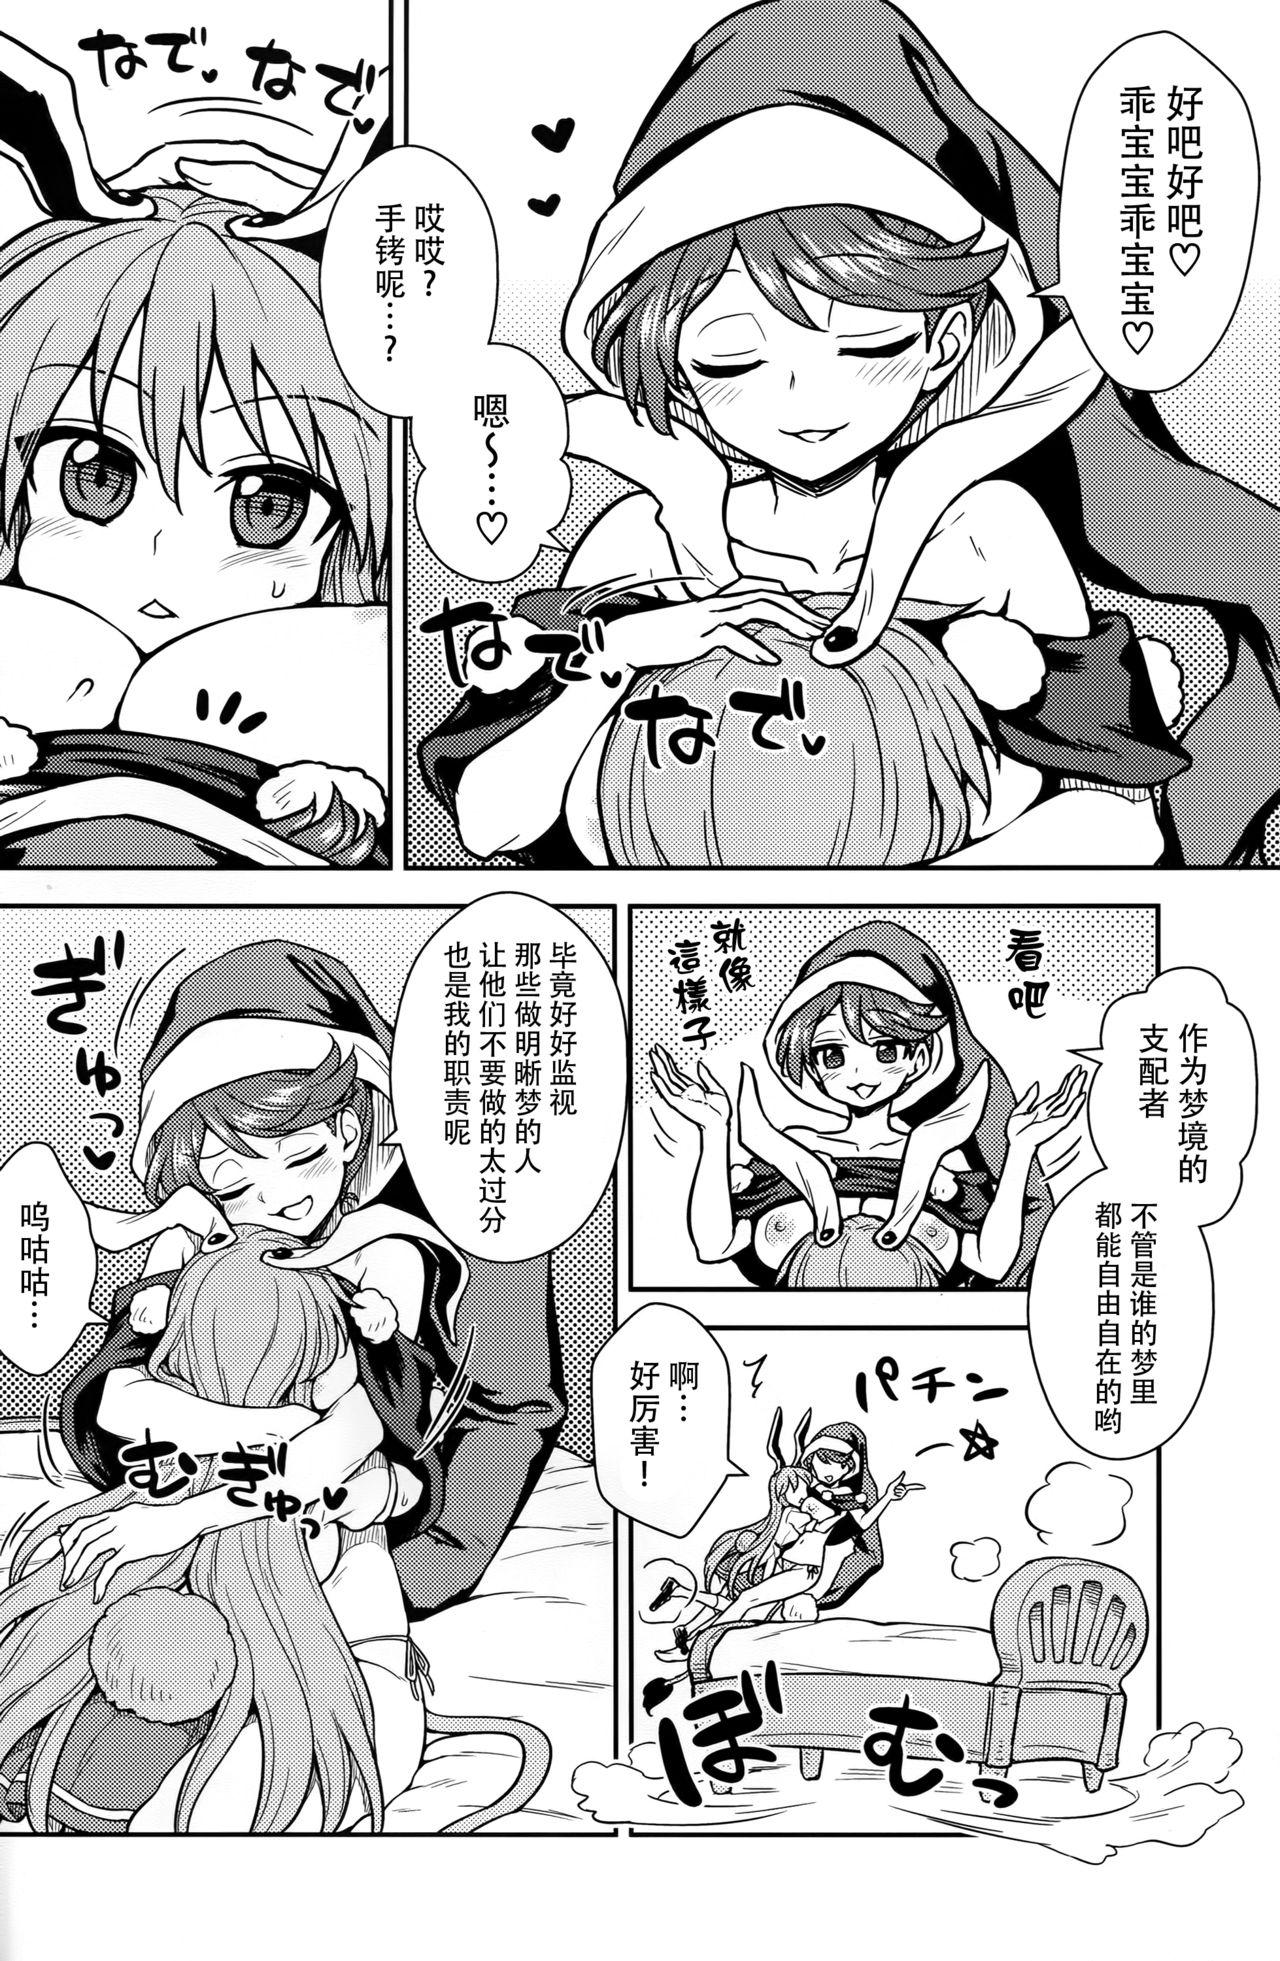 Cei Doremy-san no Dream Therapy - Touhou project Soloboy - Page 6